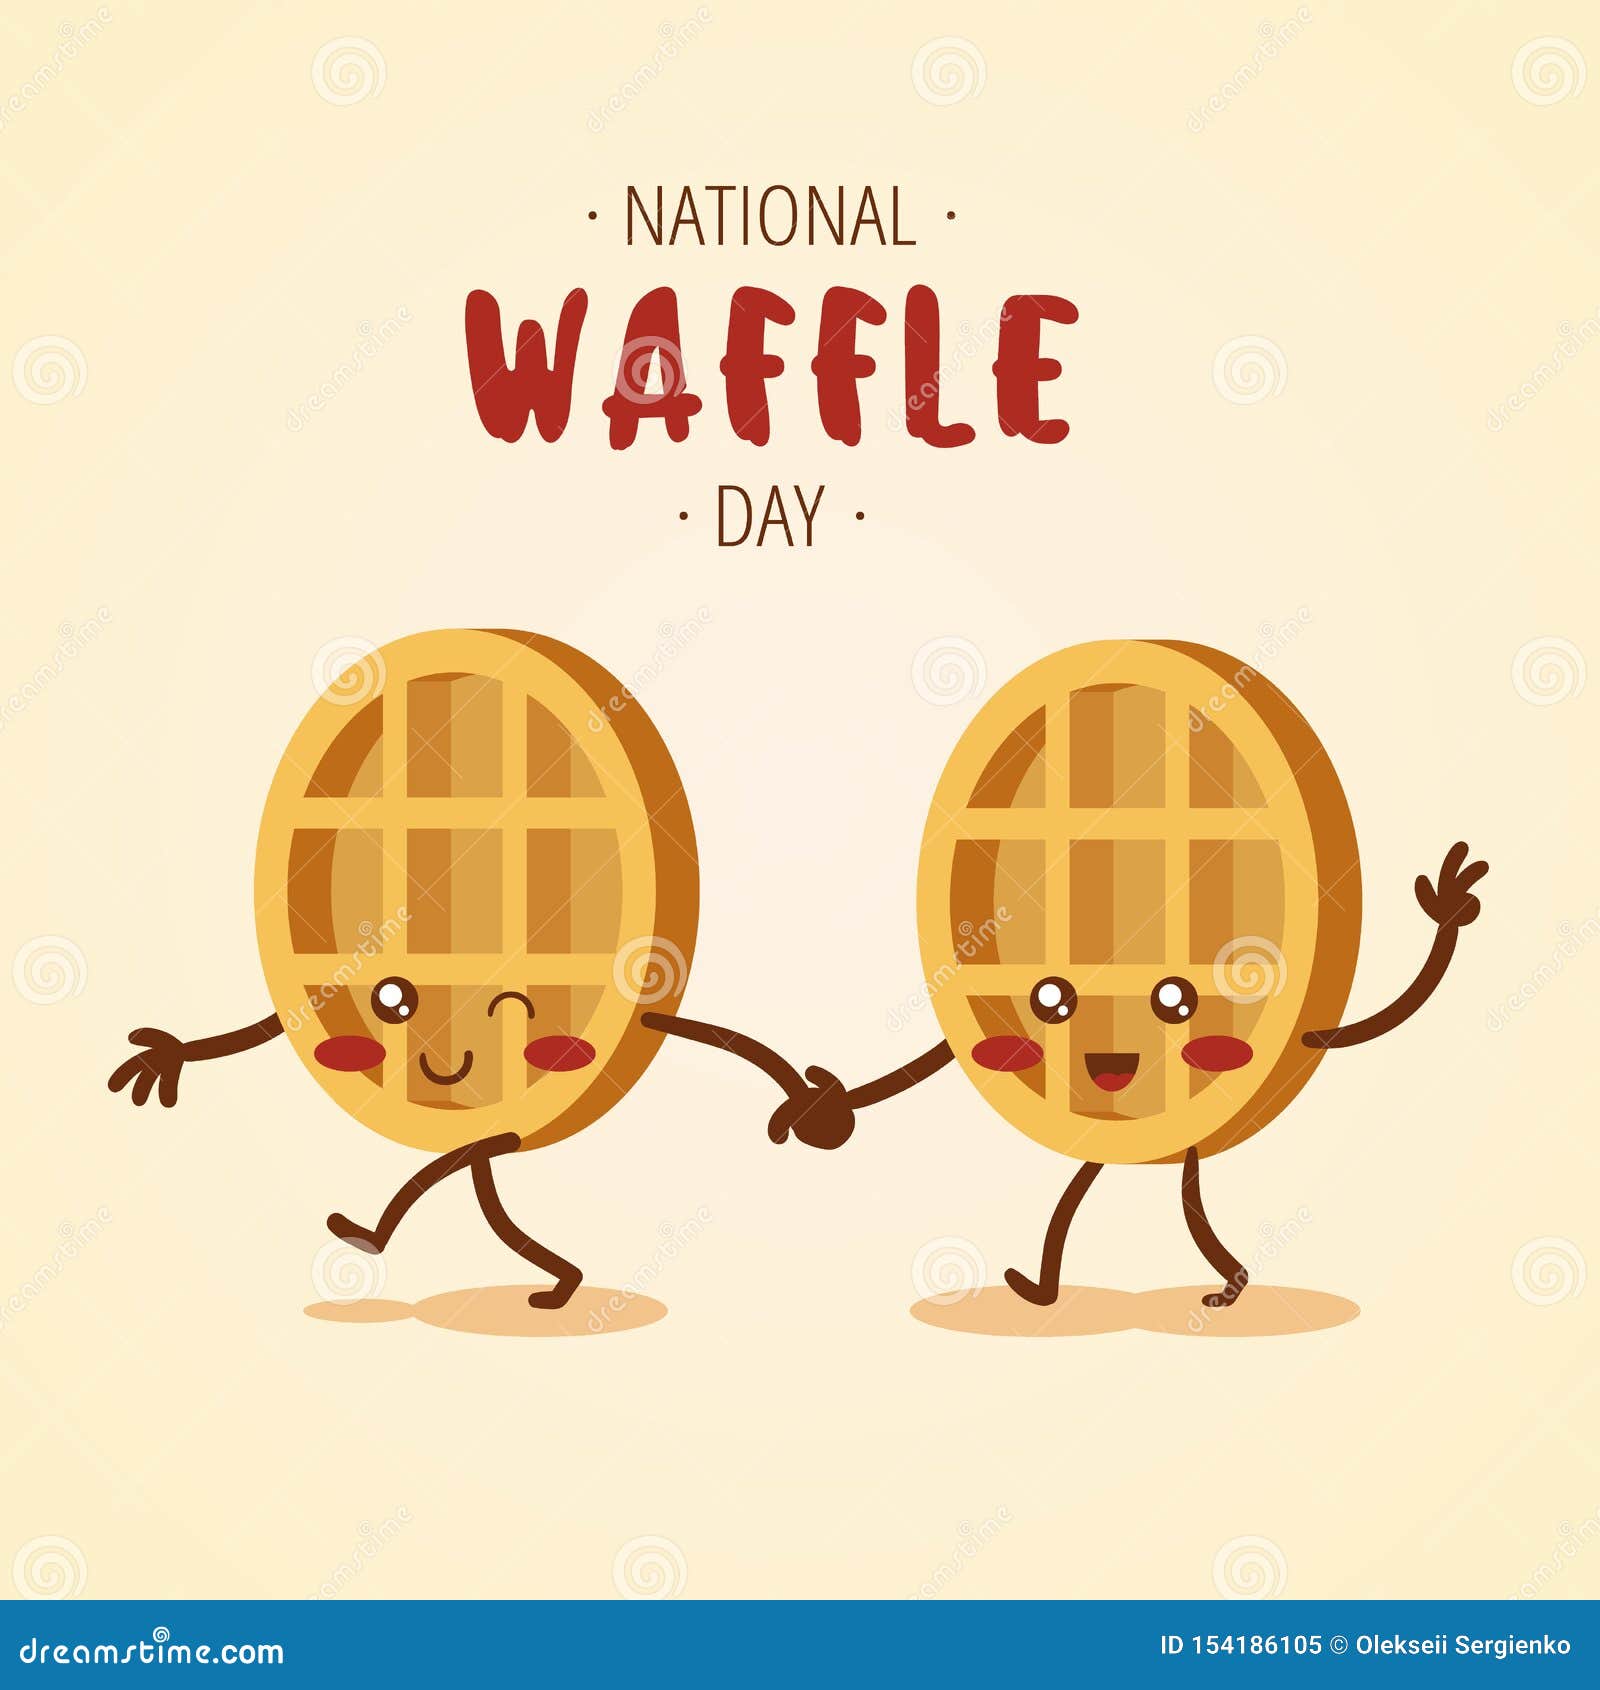 National Waffle Day Colorful Vector Waffles with Cheerful Smiles. Stock